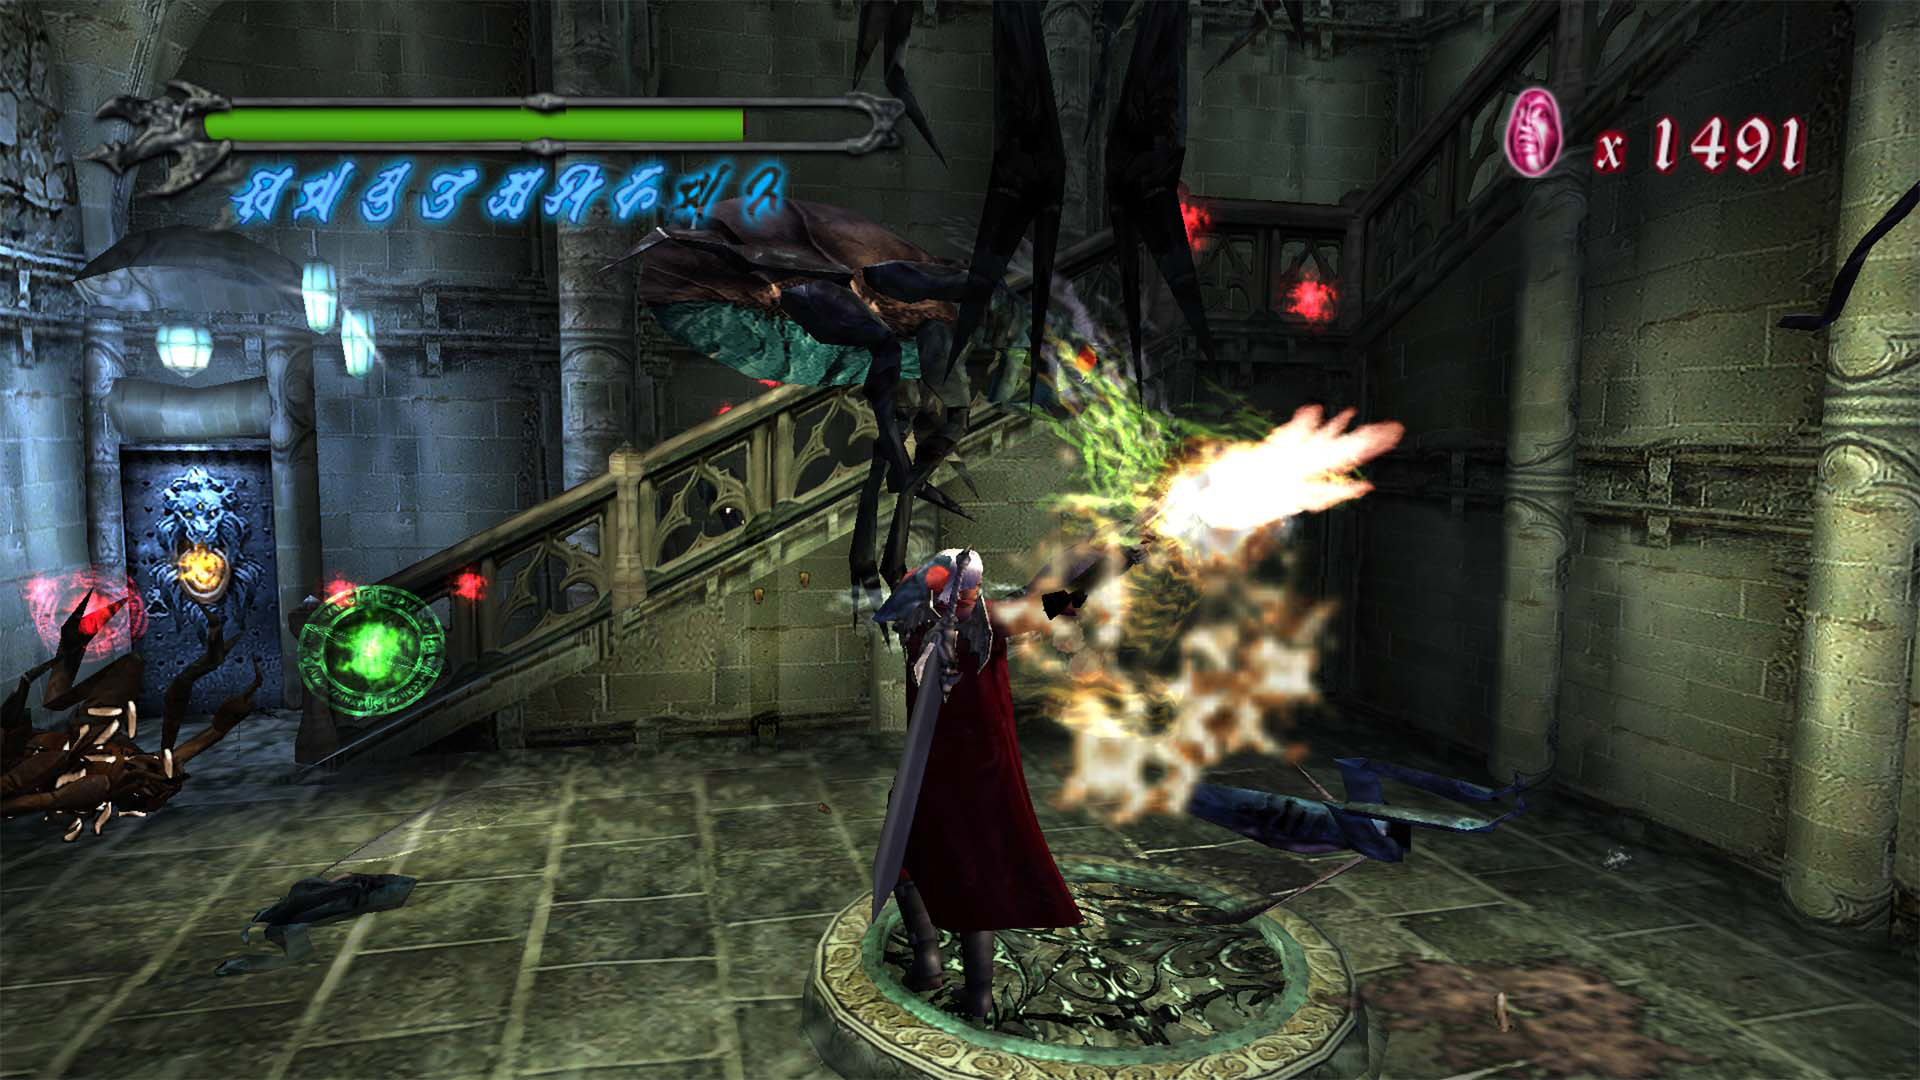 devil may cry hd collection psn